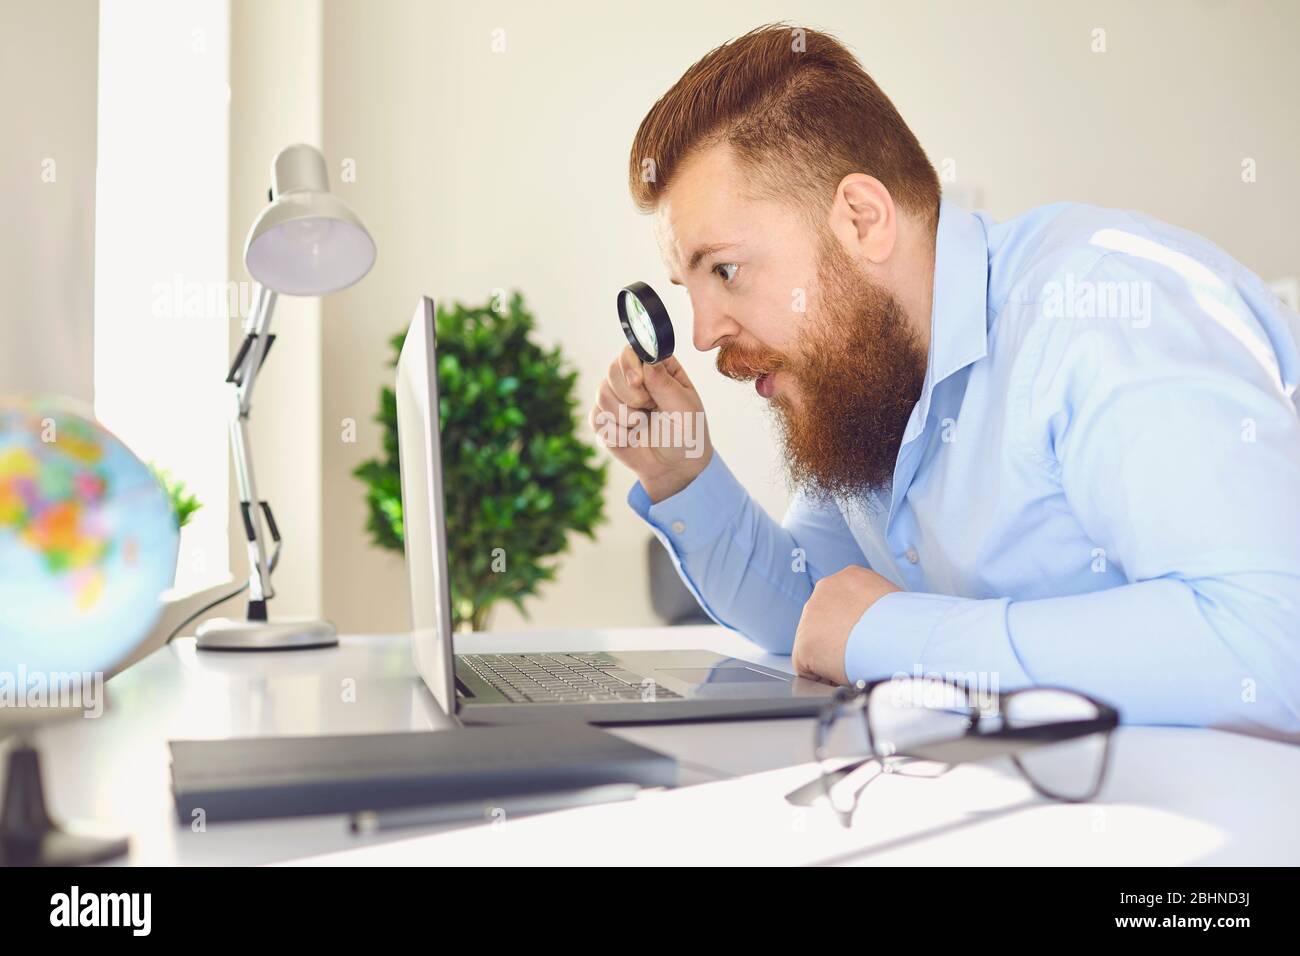 Online work at home. A funny fat bearded man with a laptop increases magnifying information at a table at home. Stock Photo